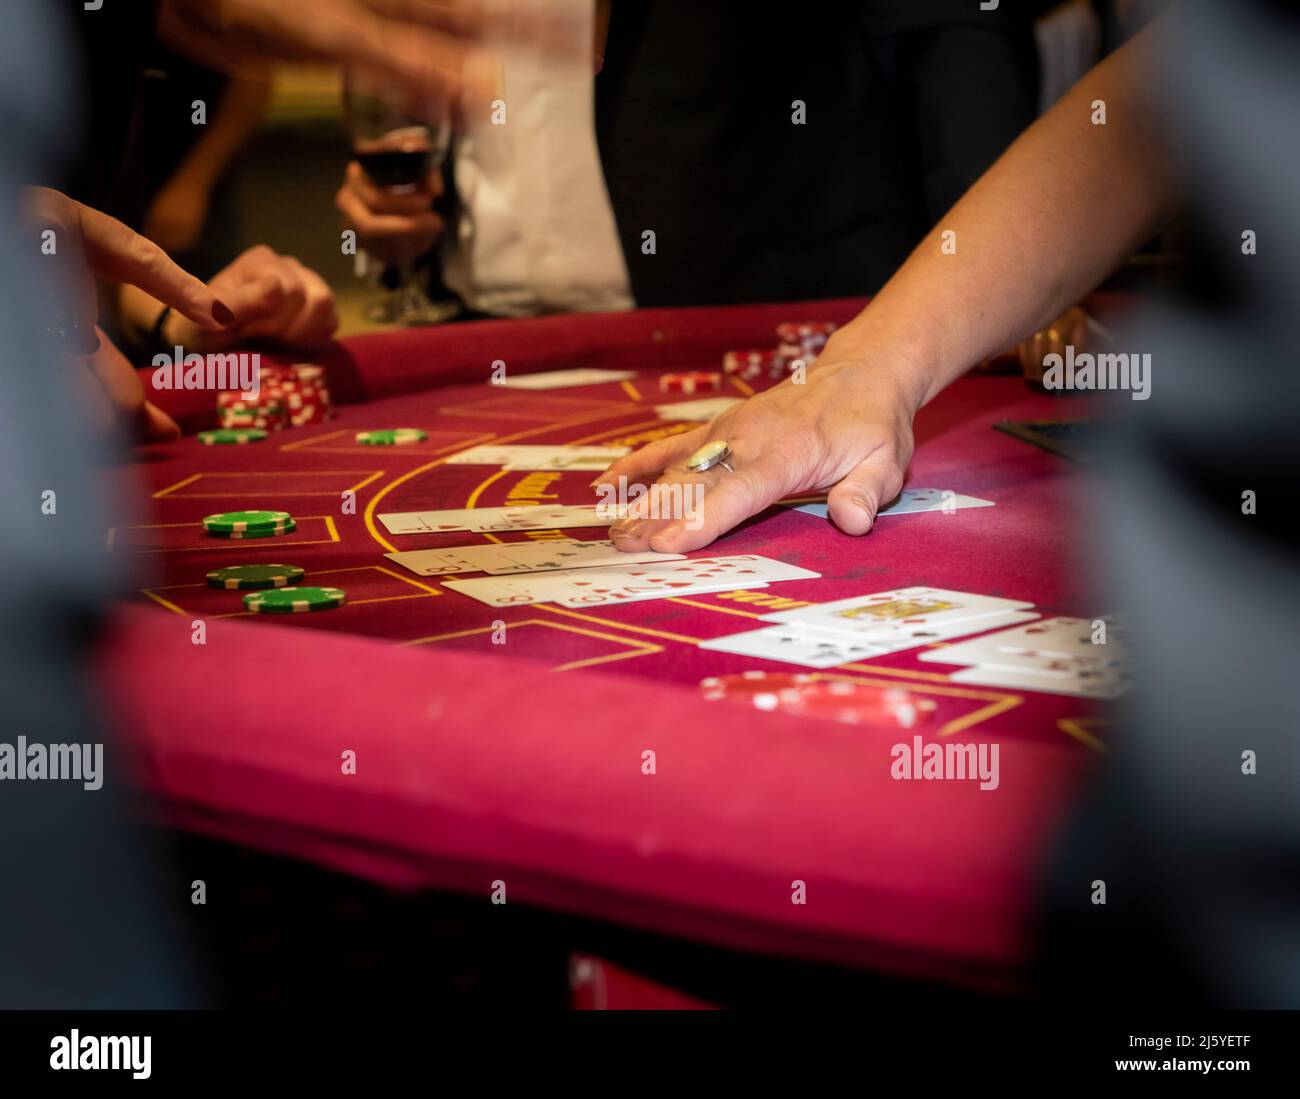 Caucasian female hand dealing cards on a round red casino table. Stock Photo